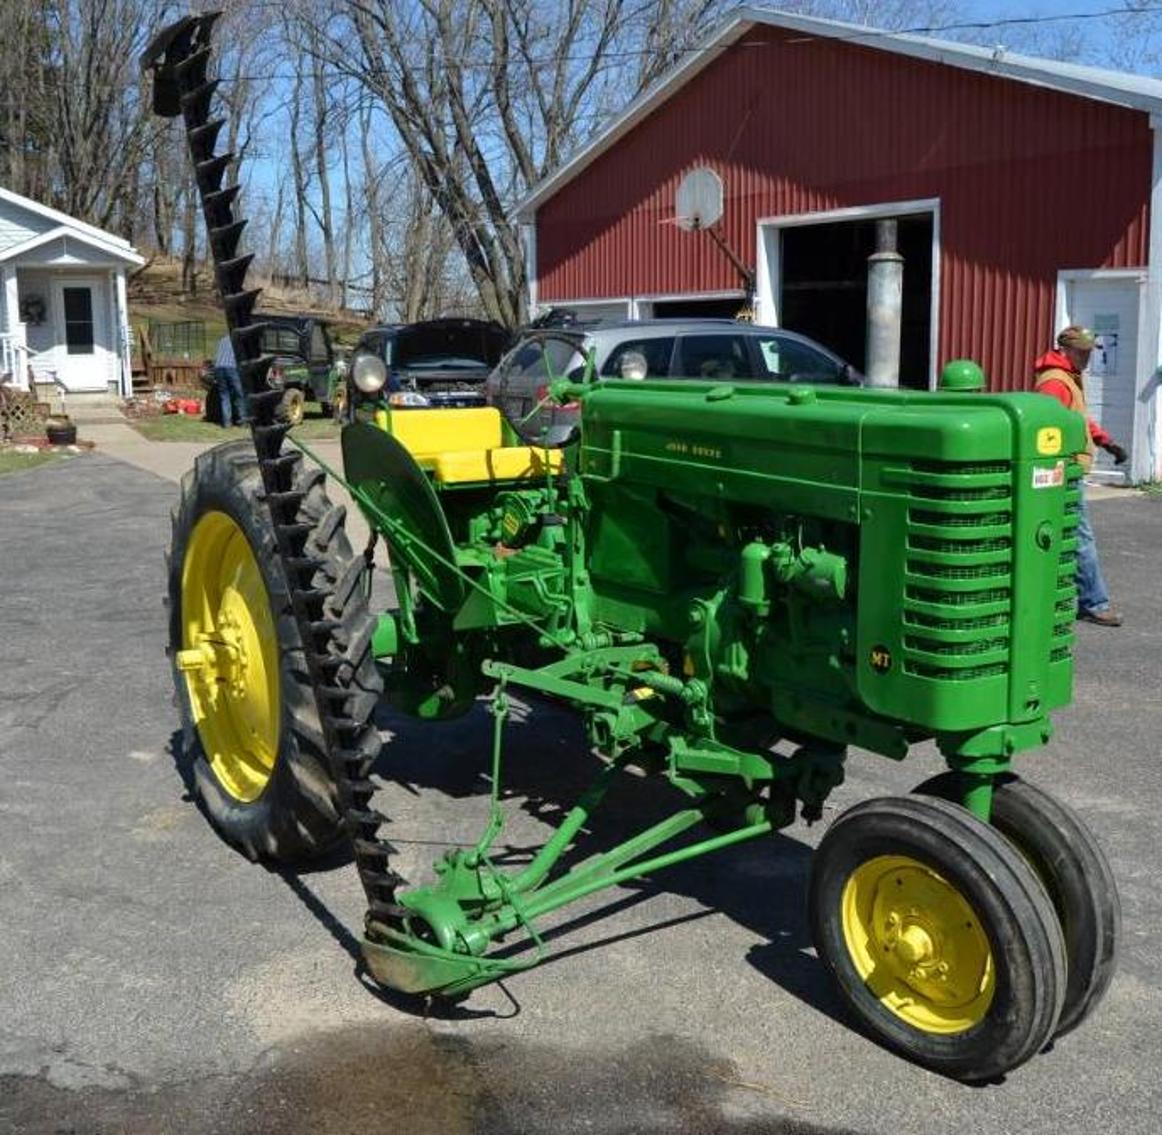 Dennis & Beverly Weiss Auction: John Deere Tractors, Machinery, Dairy Equipment, Lawn & Garden and More